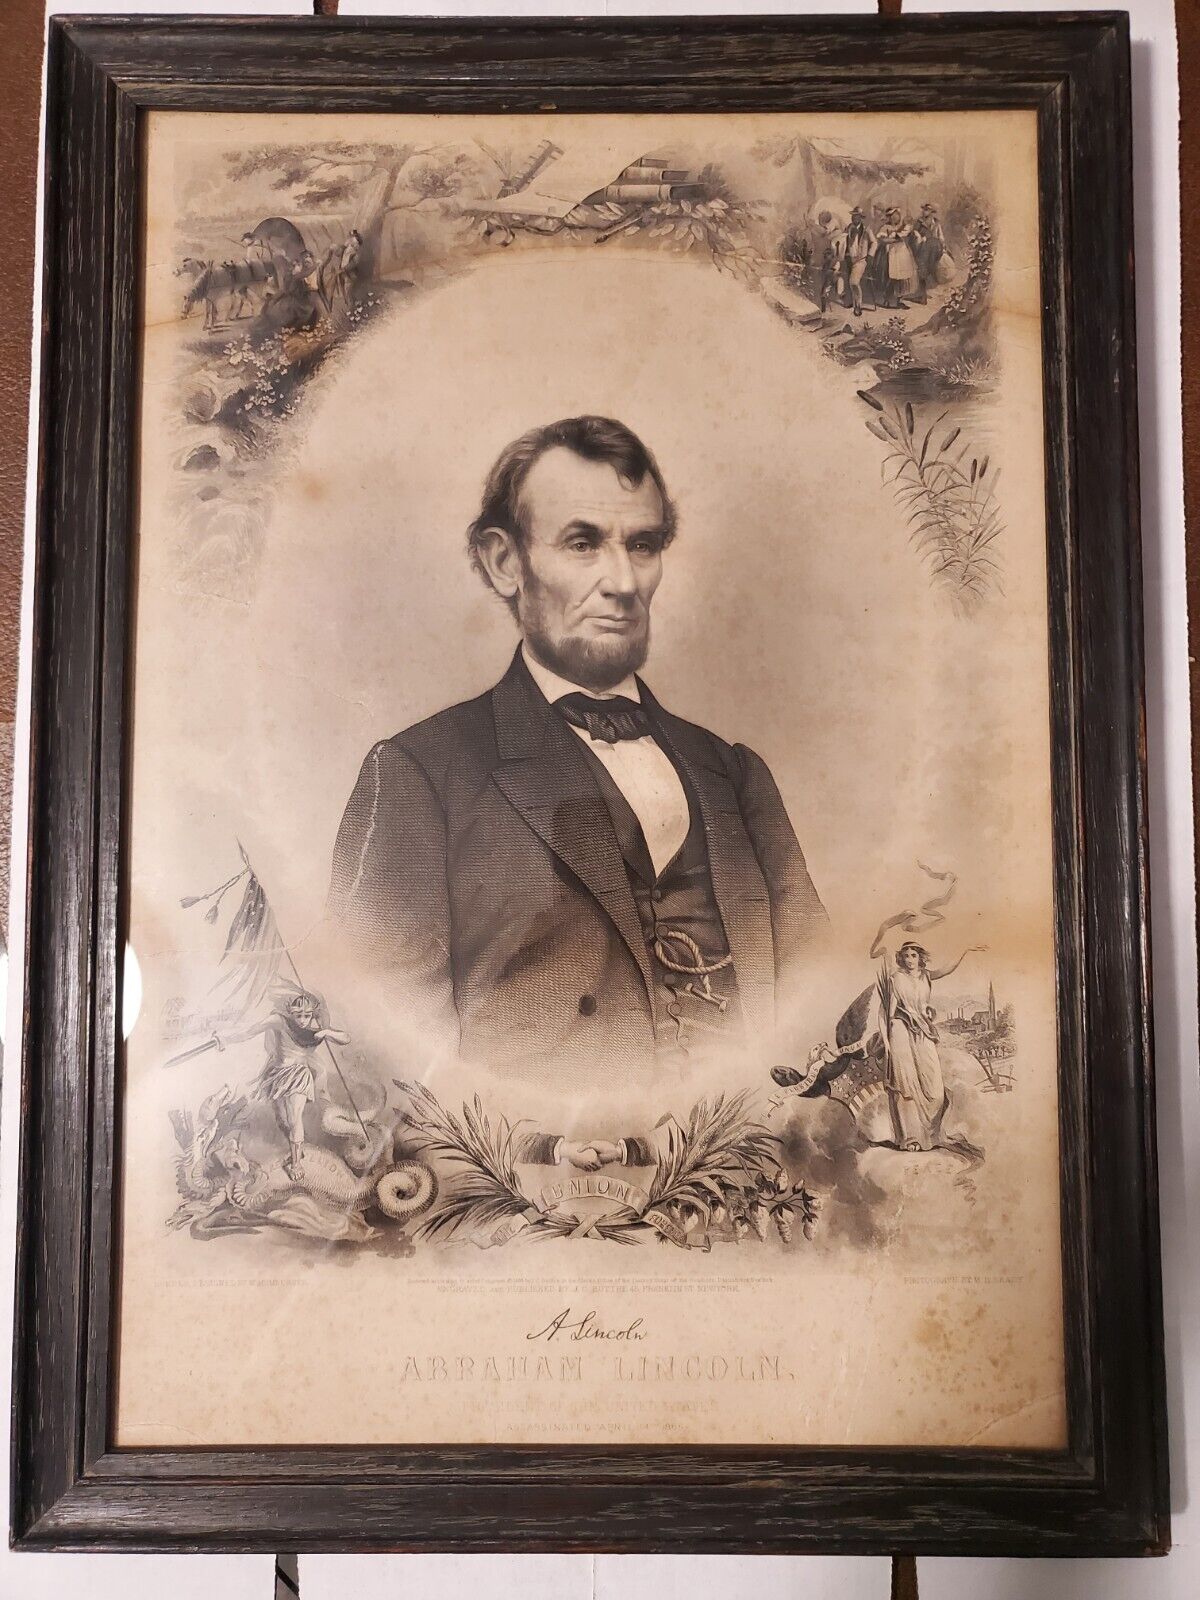 Original Abraham Lincoln Engraving By J.C. Buttre (Photo By  Brady) Period Frame